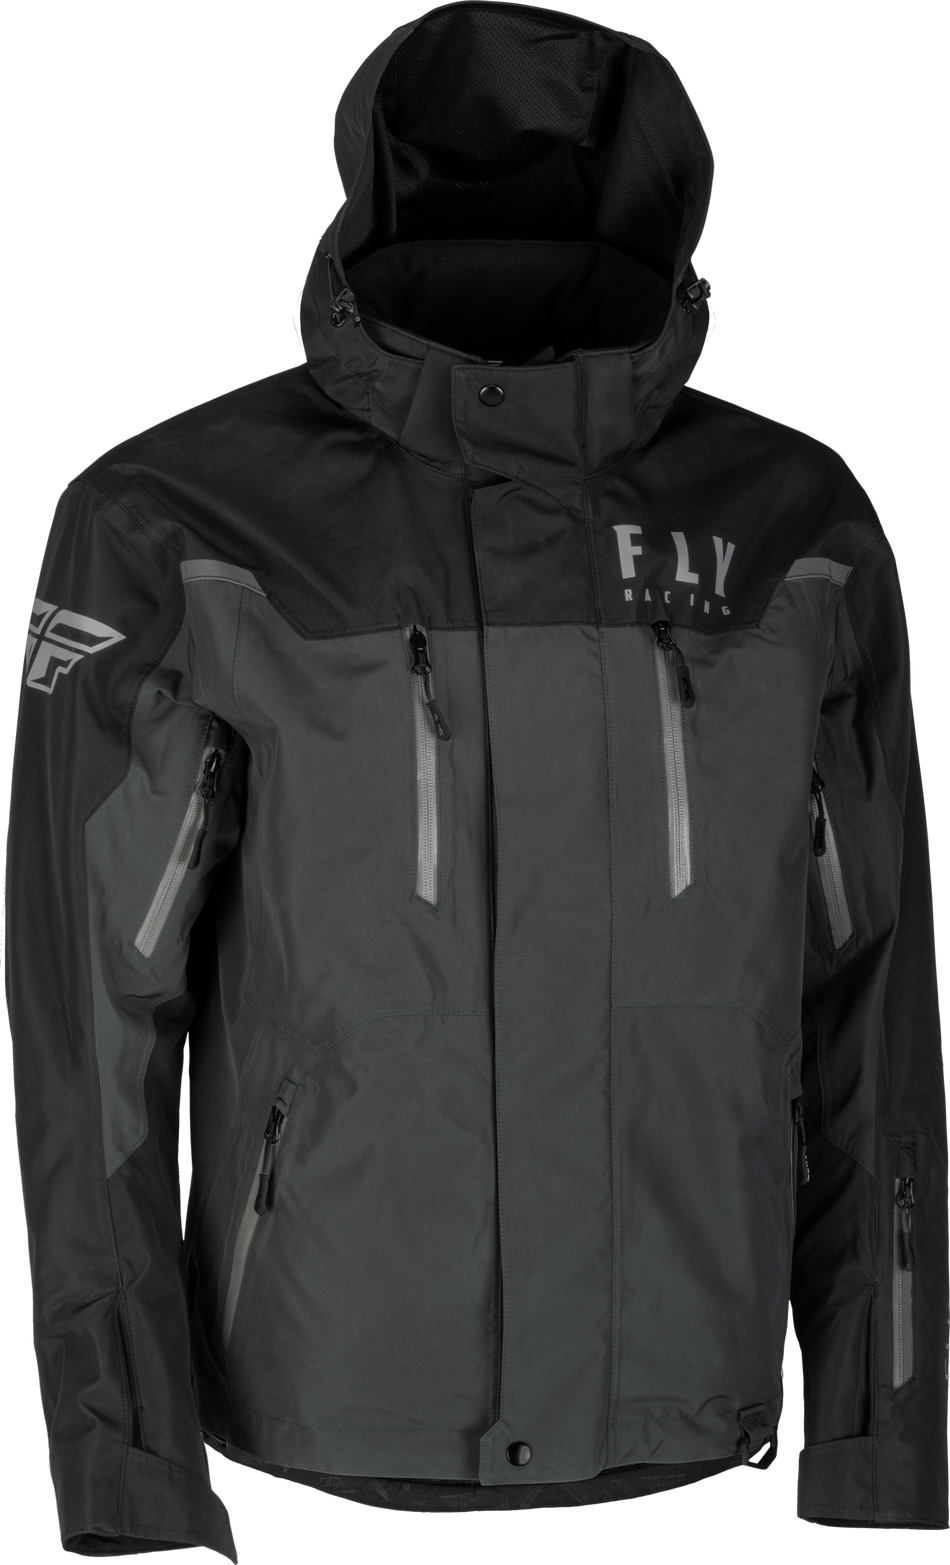 FLY RACING Incline Jacket Black/Charcoal Lg 470-4103L